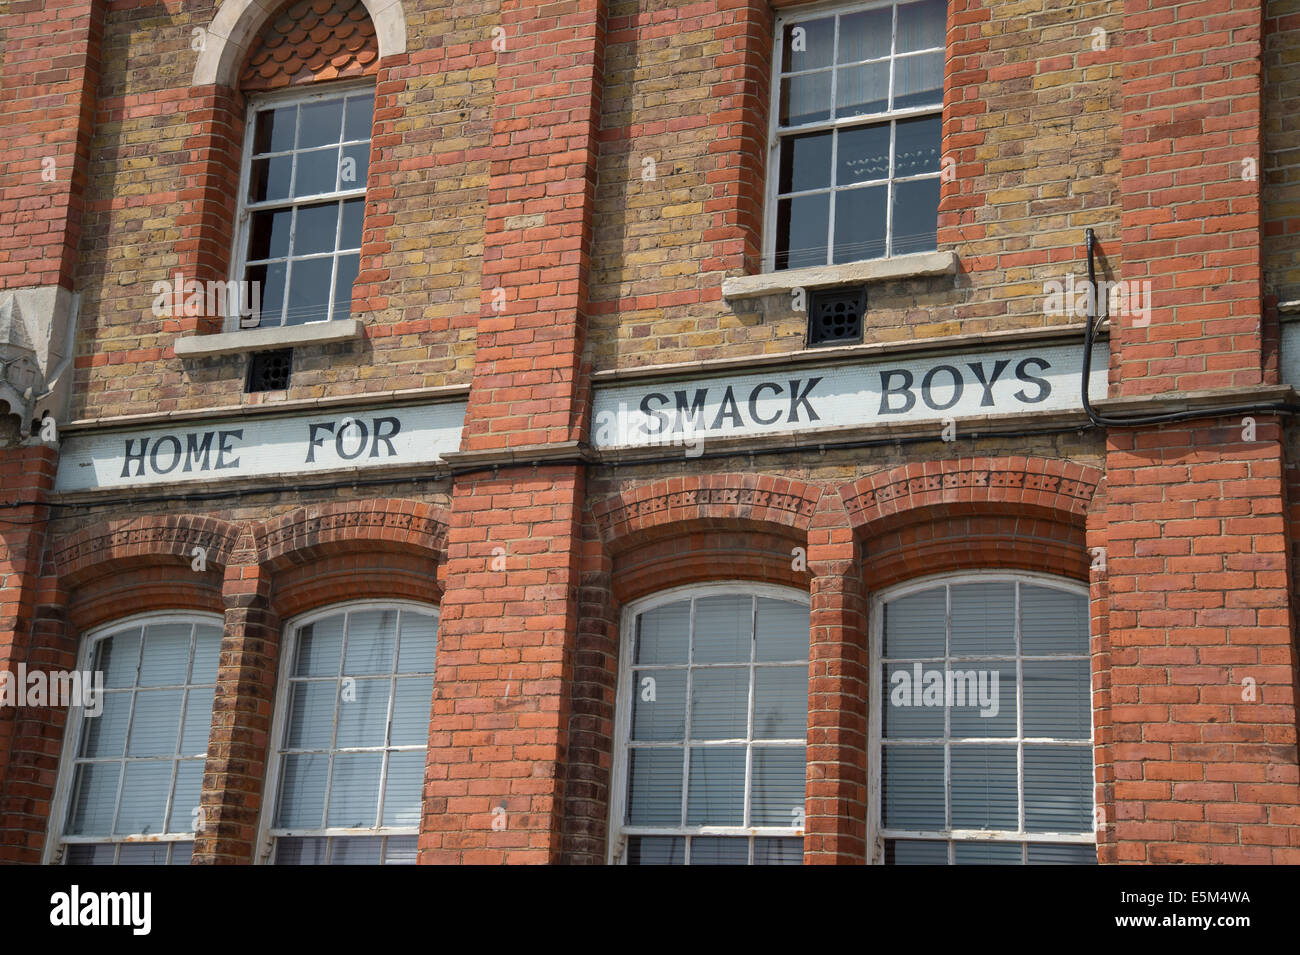 Ramsgate, Kent. Restored red brick building with sign 'Home for Smack Boys' Stock Photo